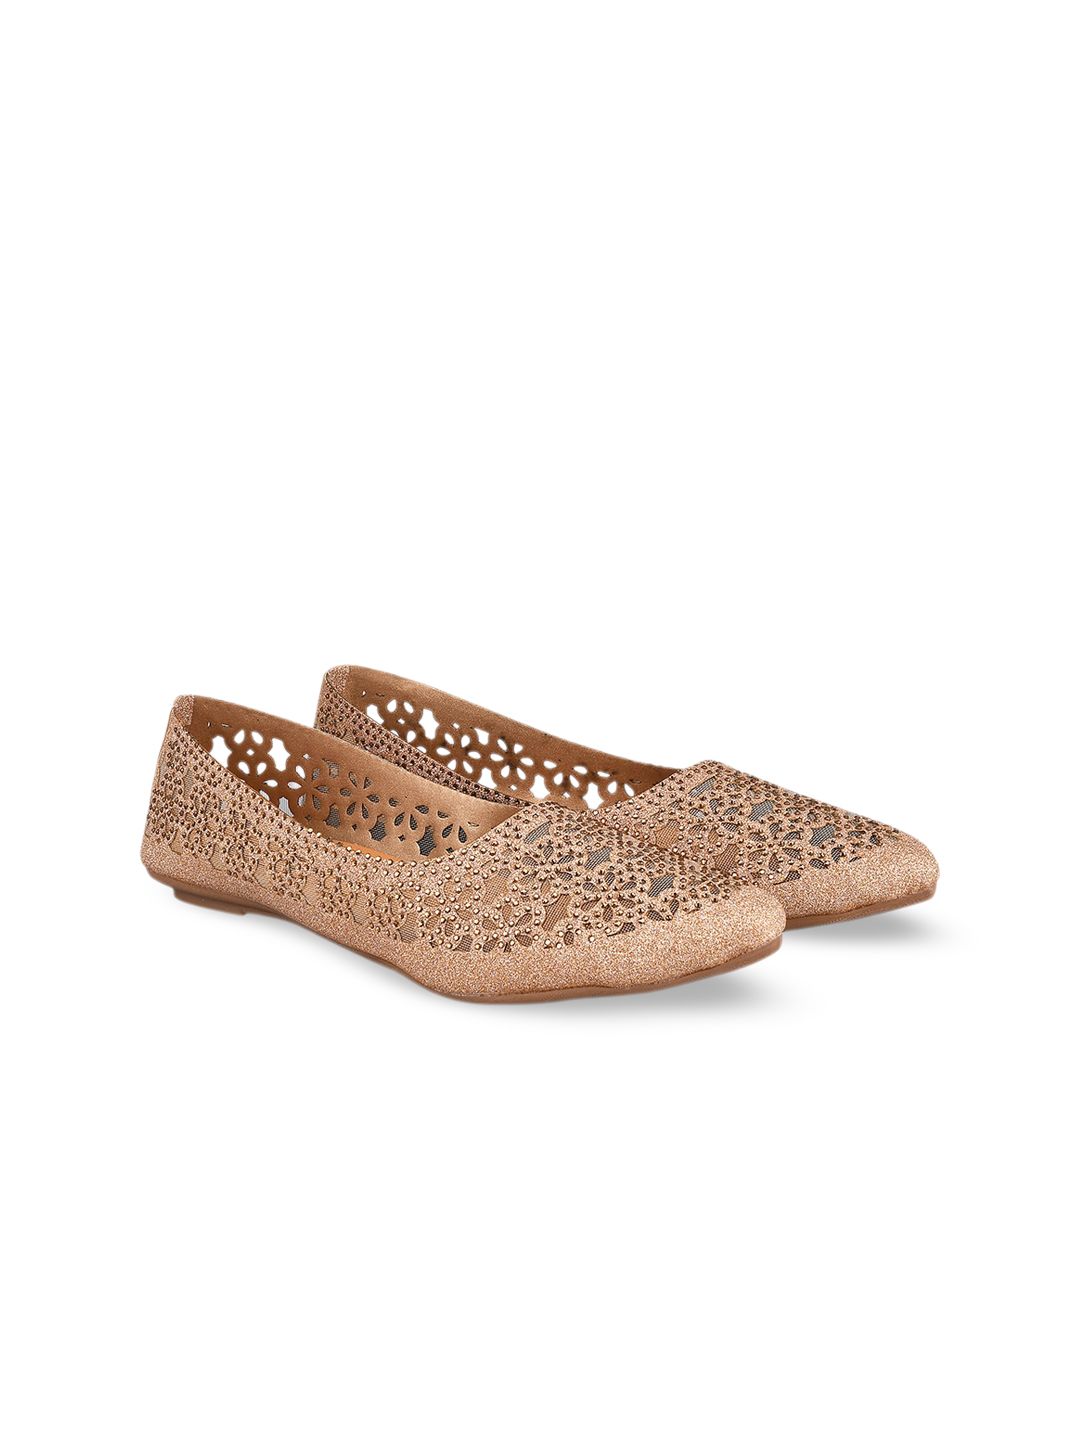 JM Looks Women Gold-Toned Ballerinas with Laser Cuts Flats Price in India